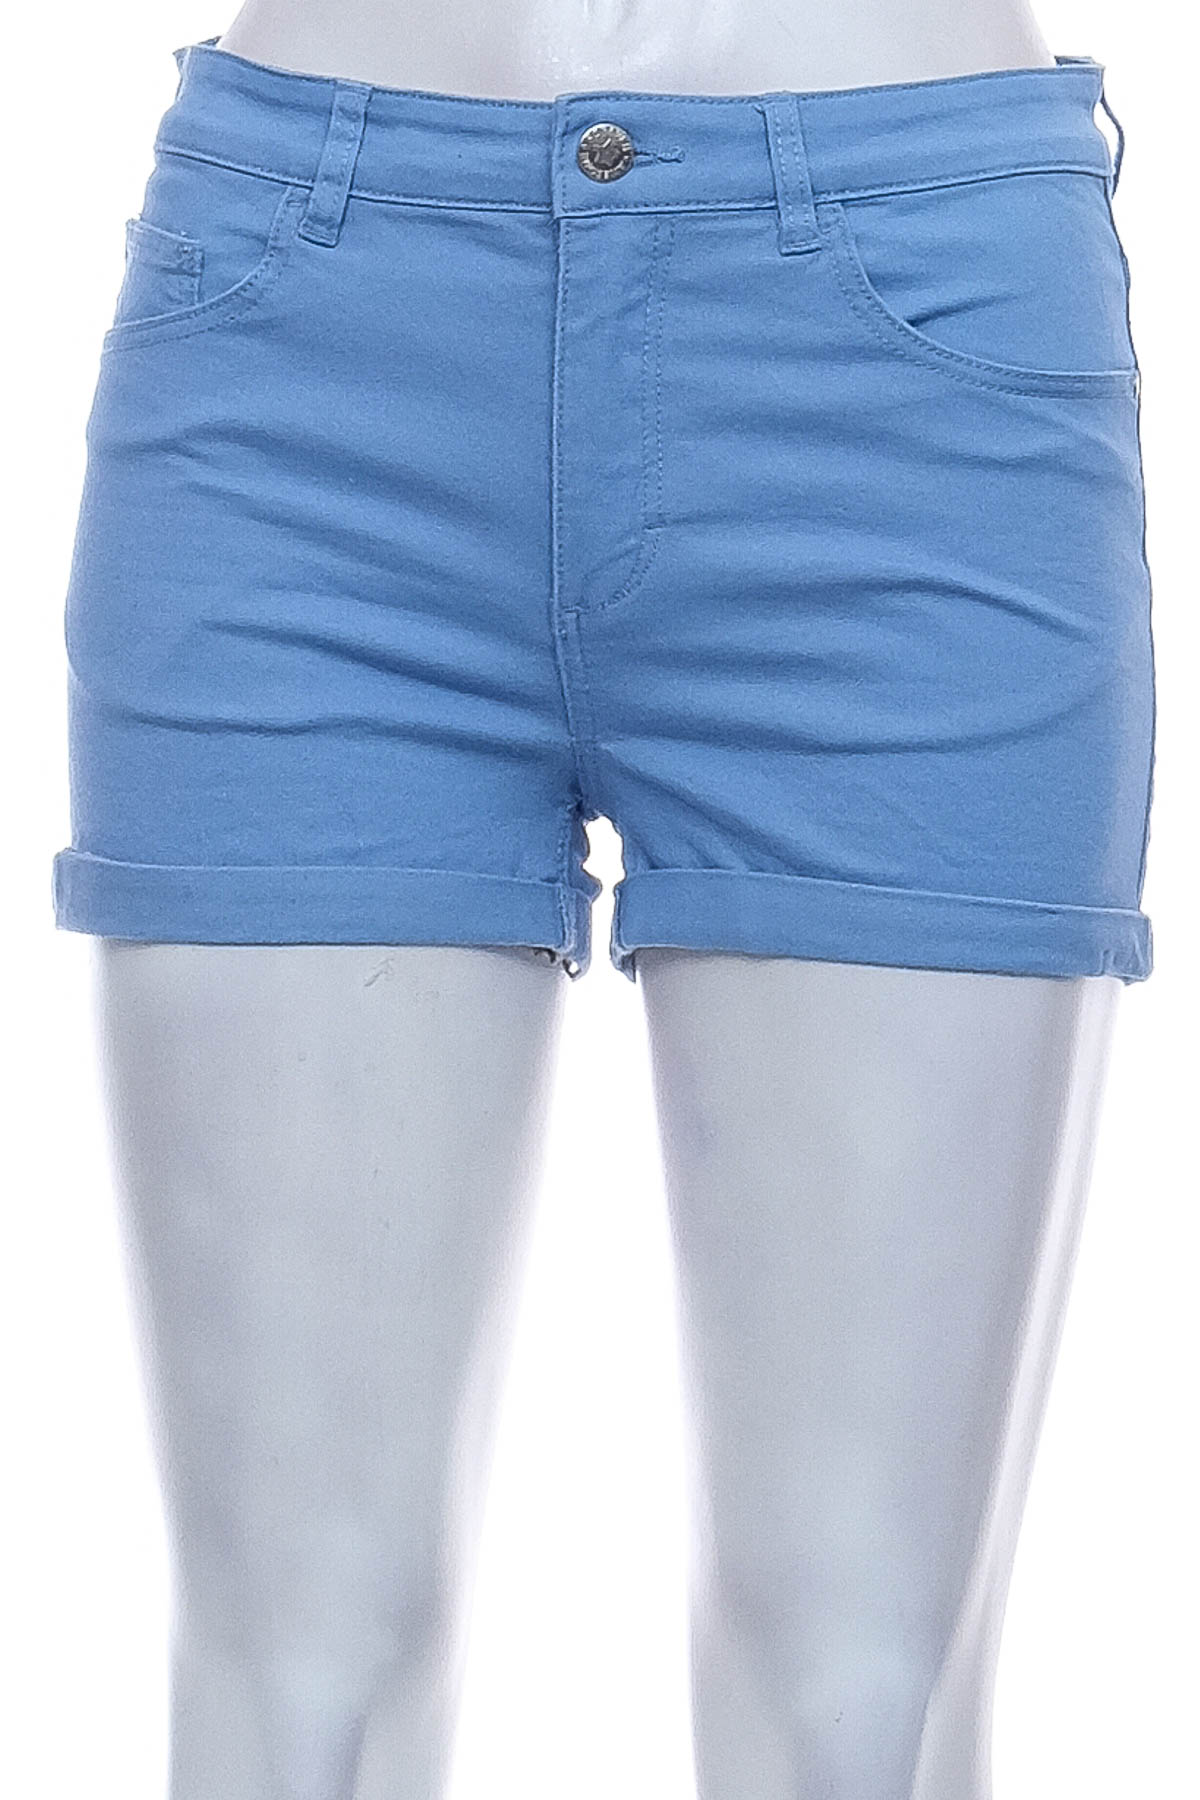 Shorts for girls - H&M - 0